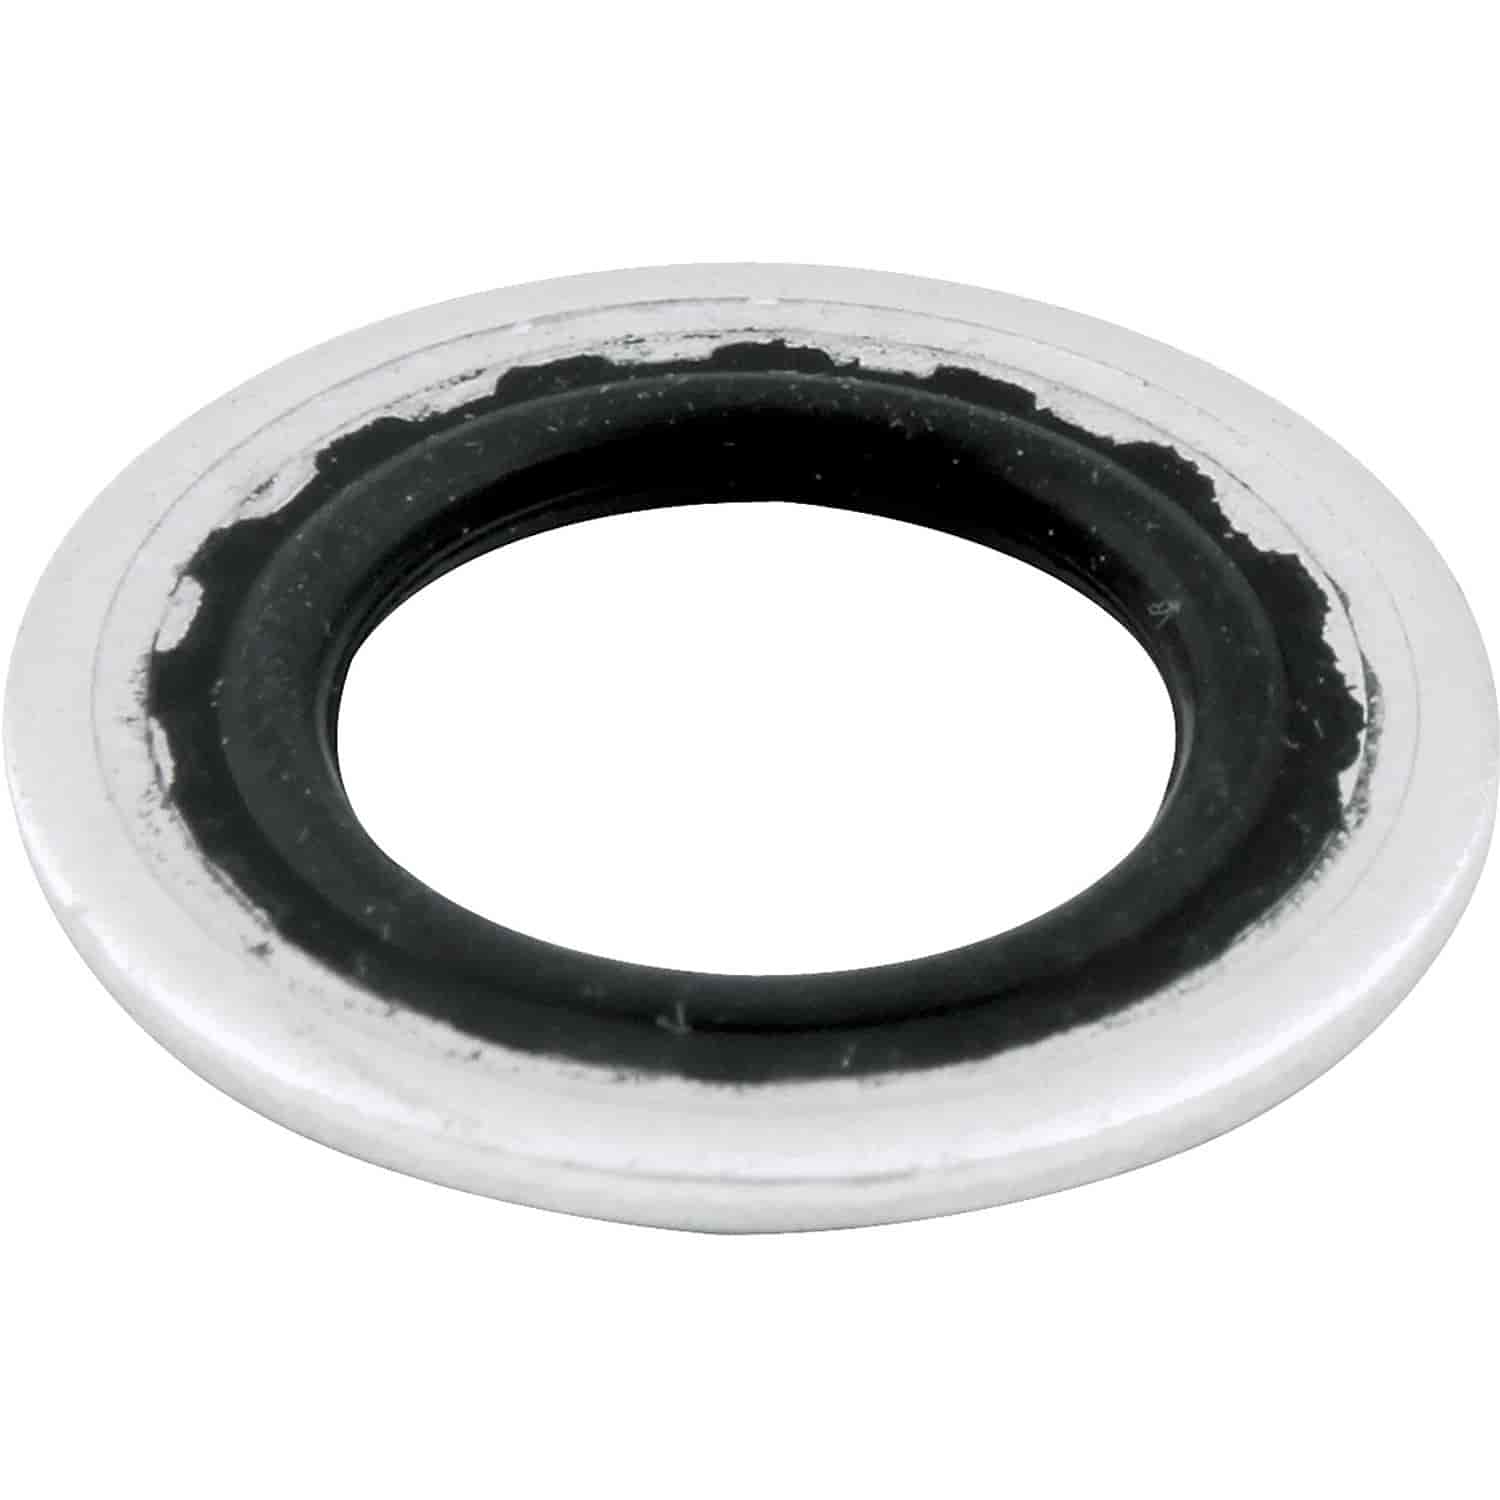 Wheel Disconnect Sealing Washers 4-Pack